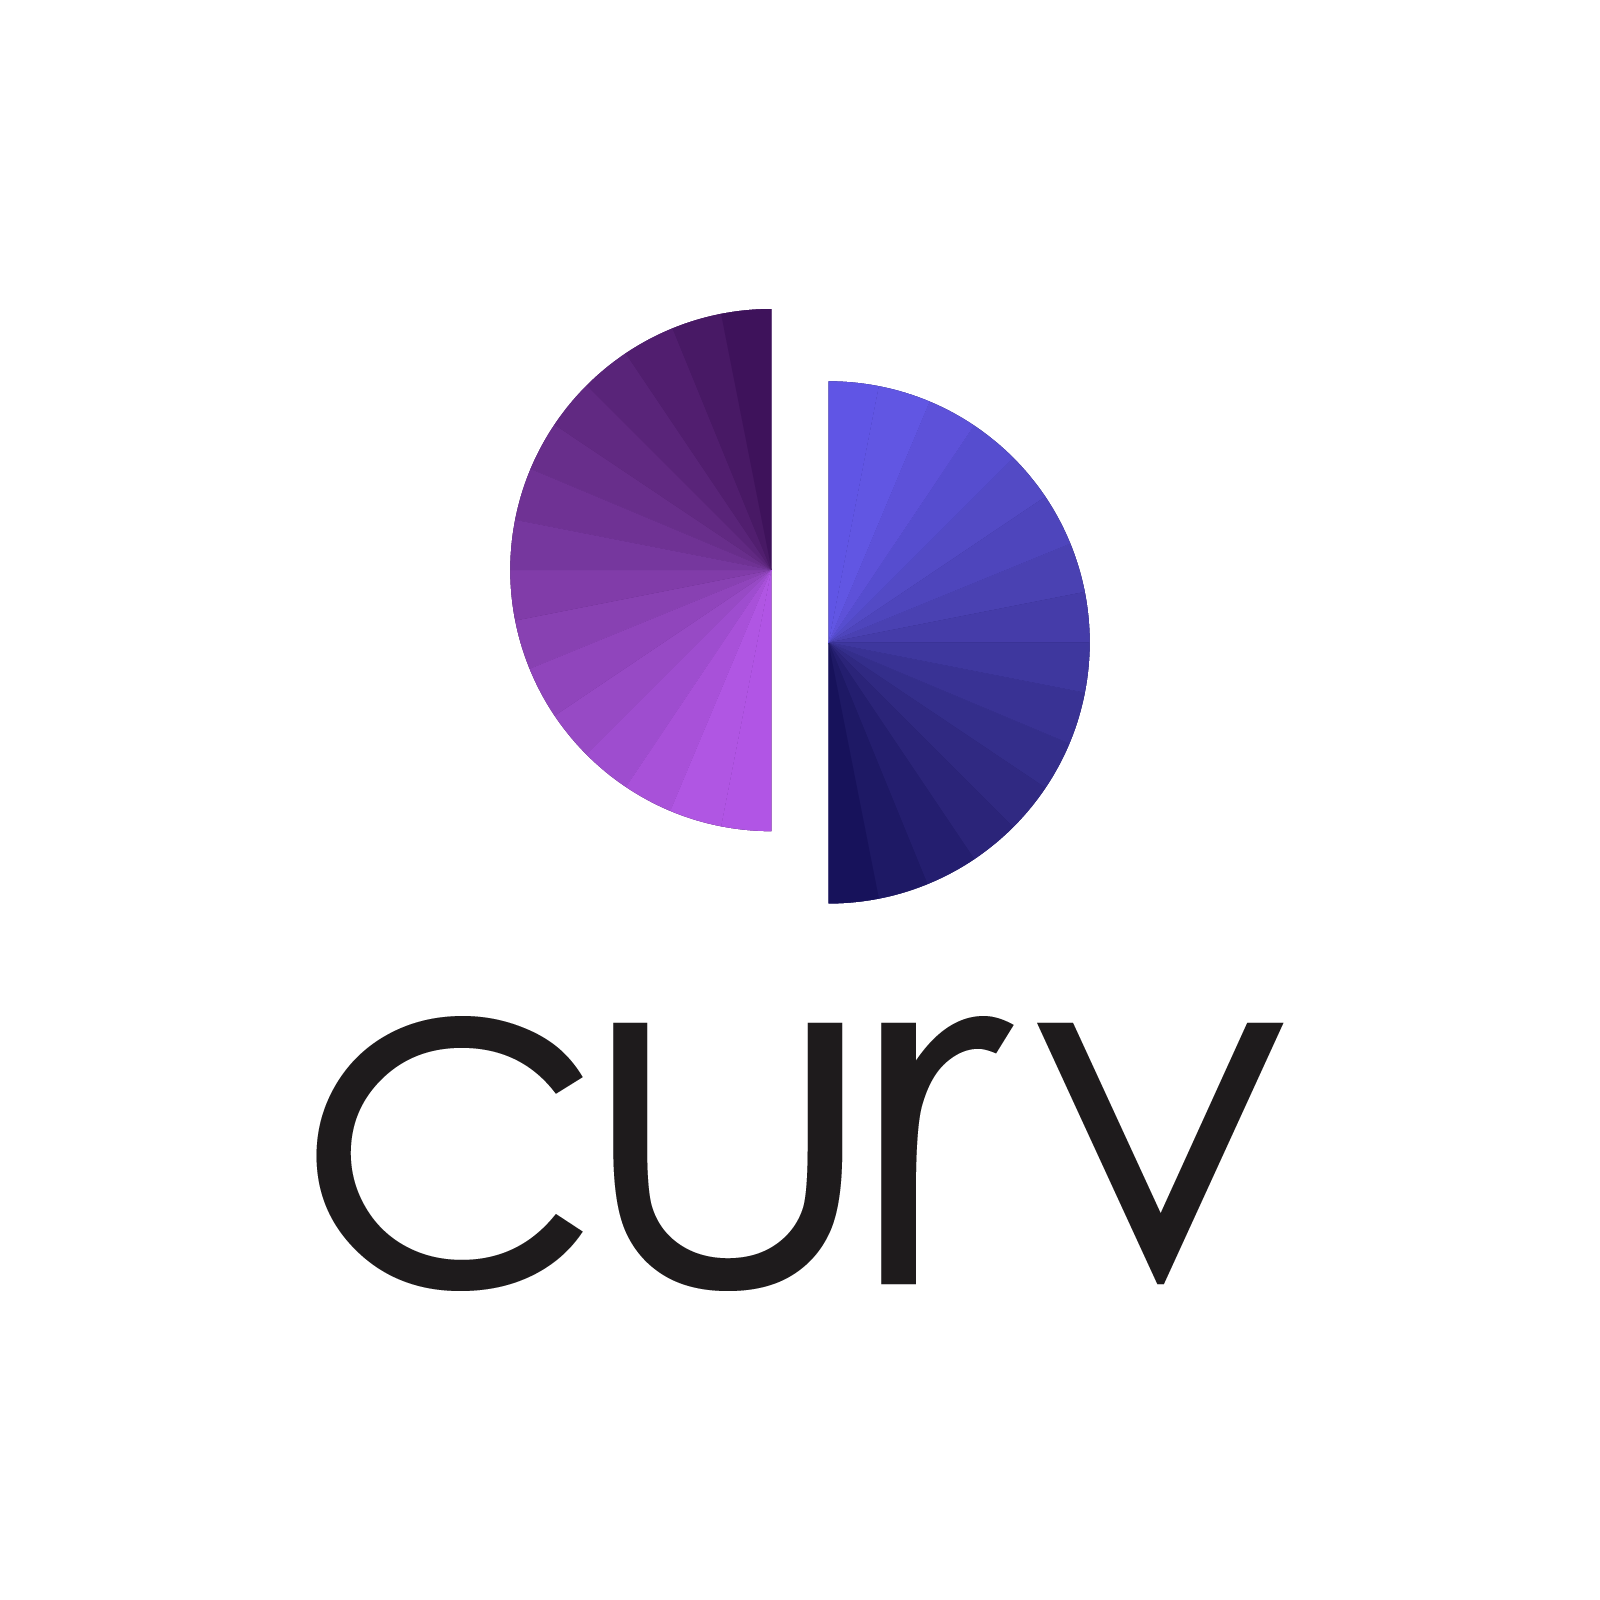 Curv Air Gap Debuts, Expands Digital Asset Security for eToro with Math Breakthrough